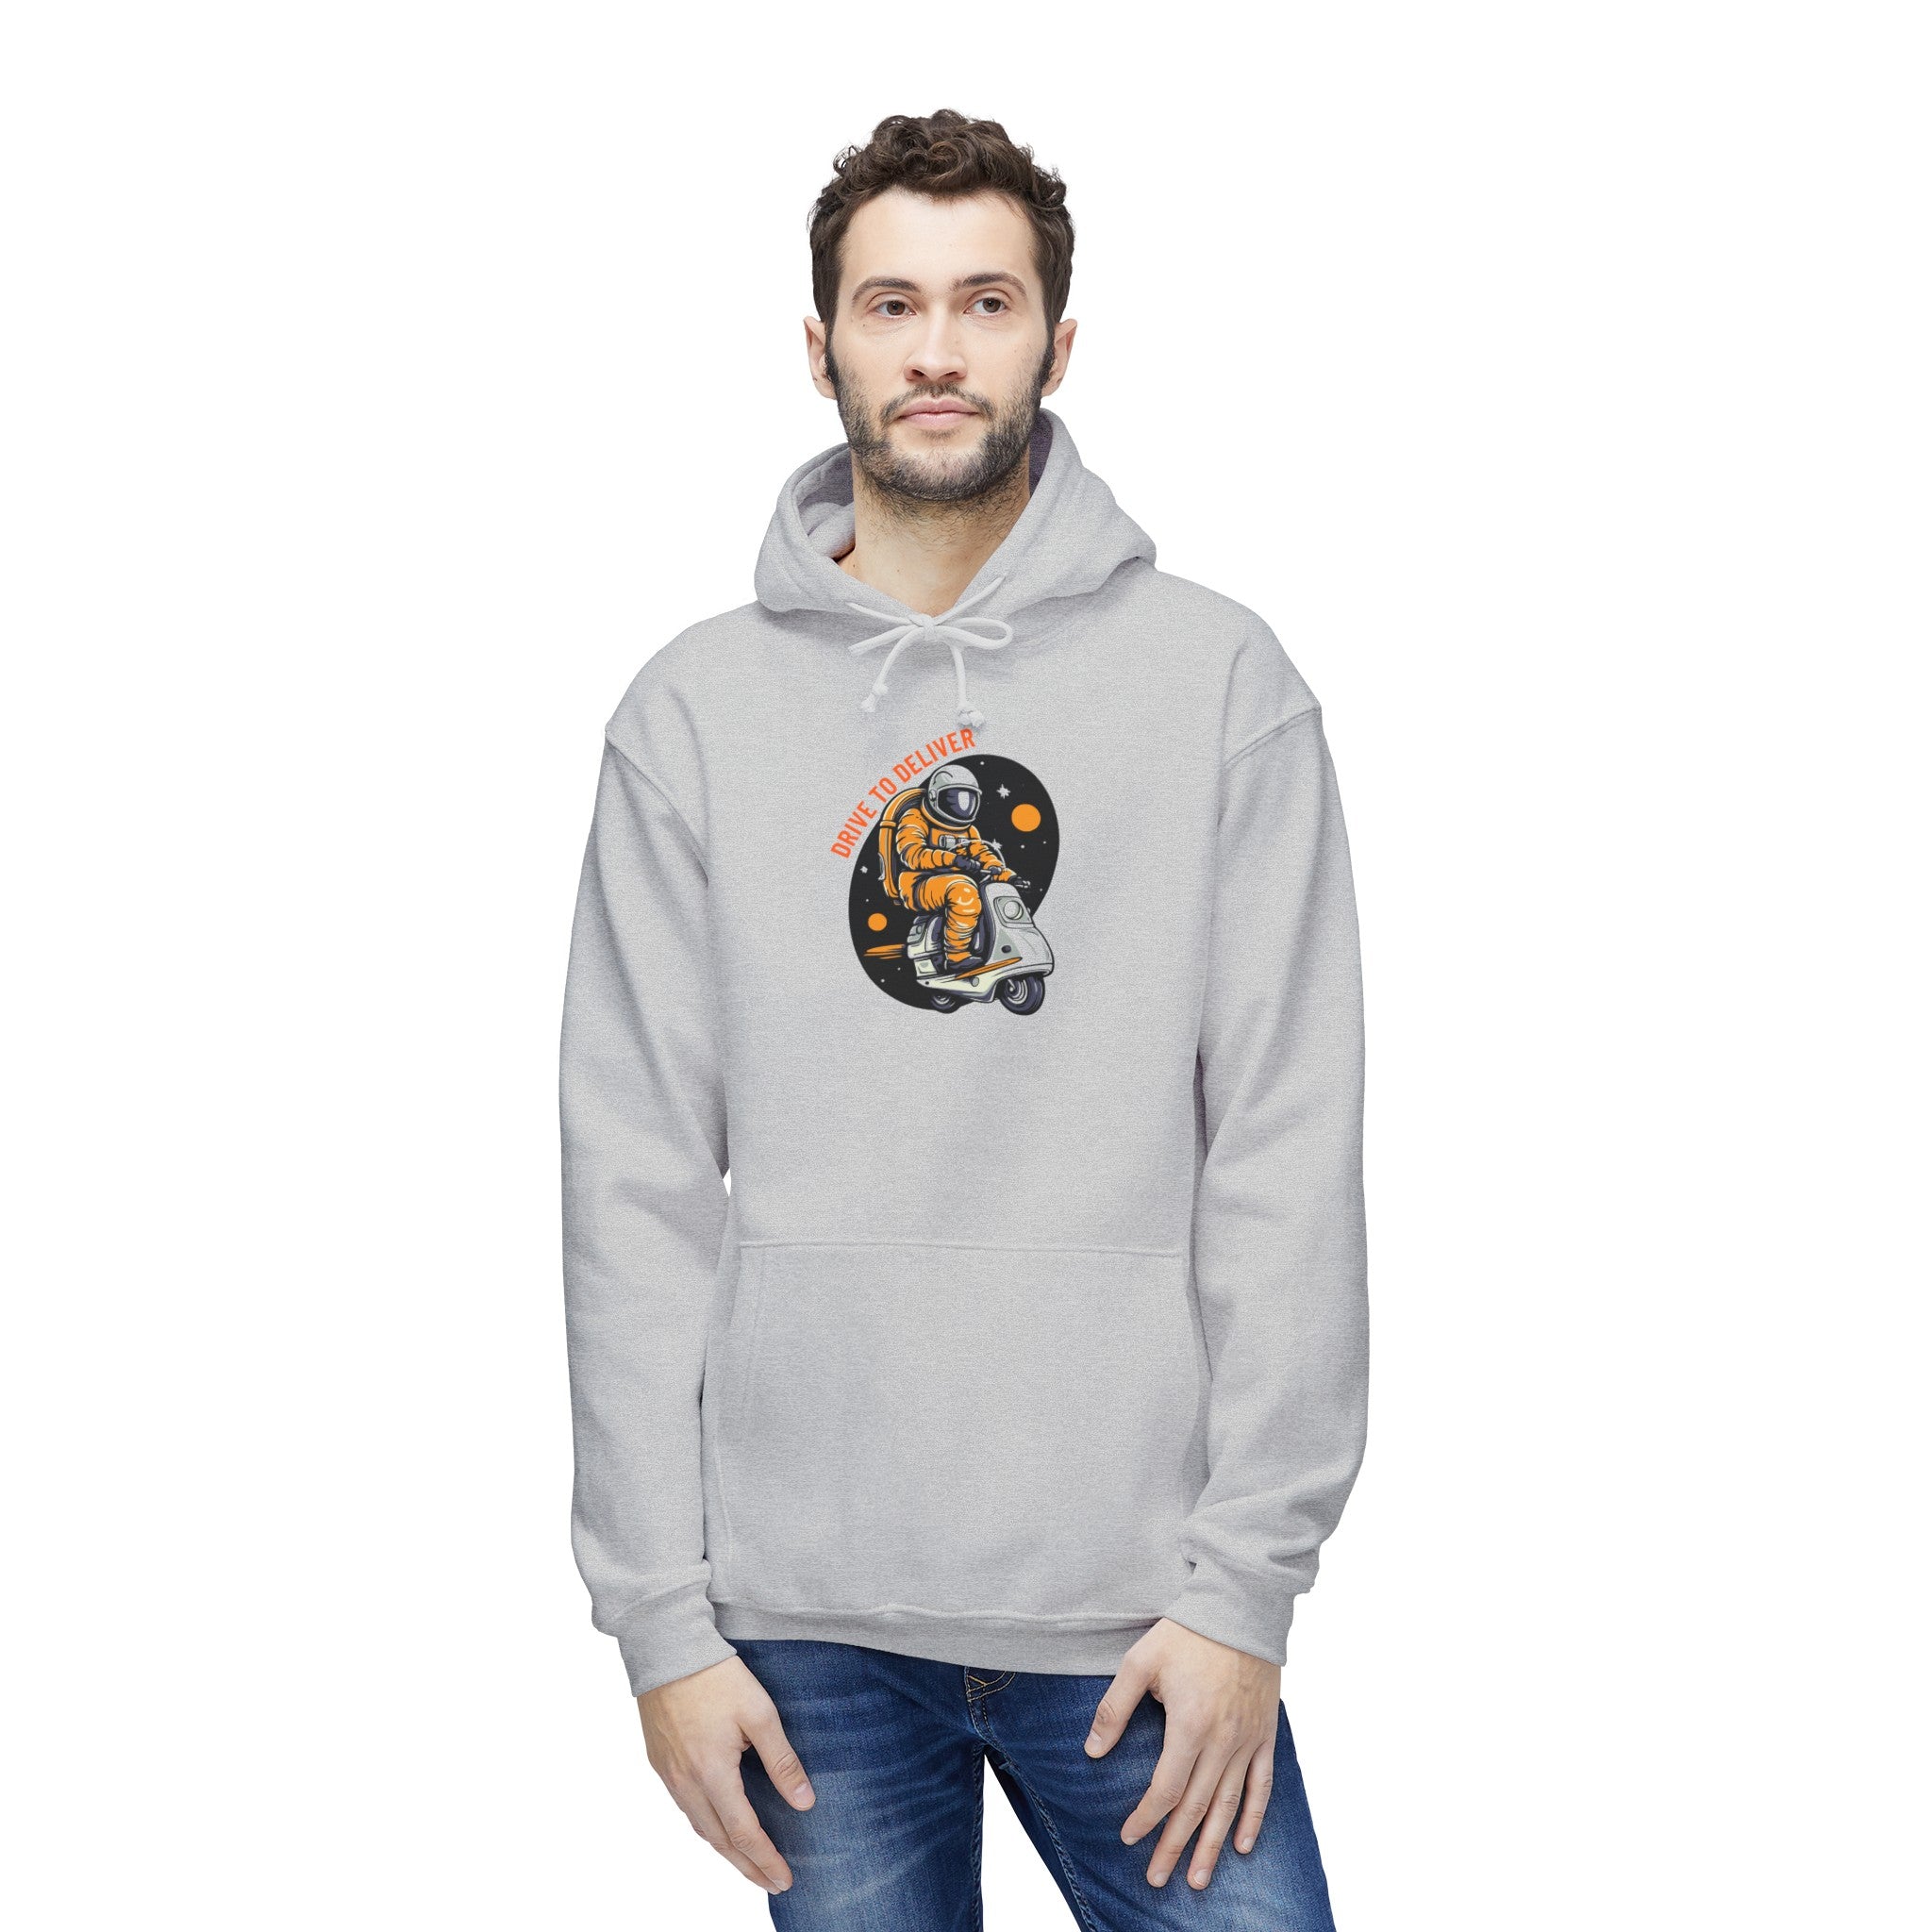 Drive To Deliver - Unisex Hooded Sweatshirt, Made in US